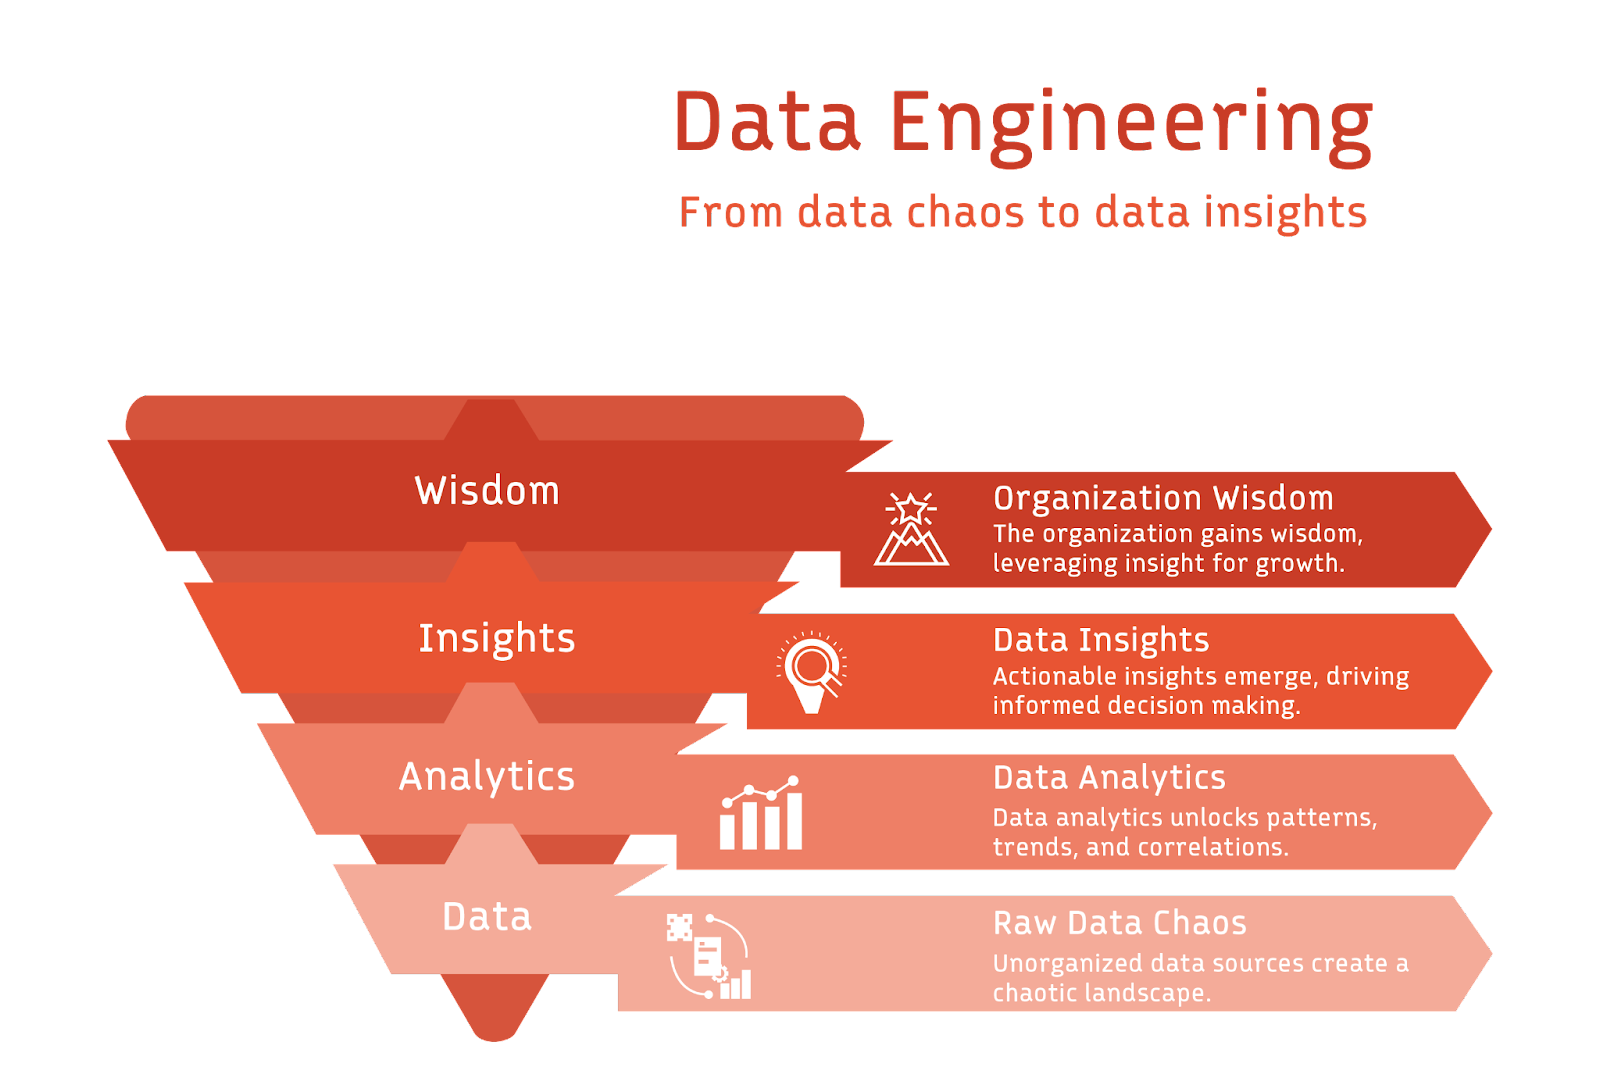 Overview of the layers involved in data engineering